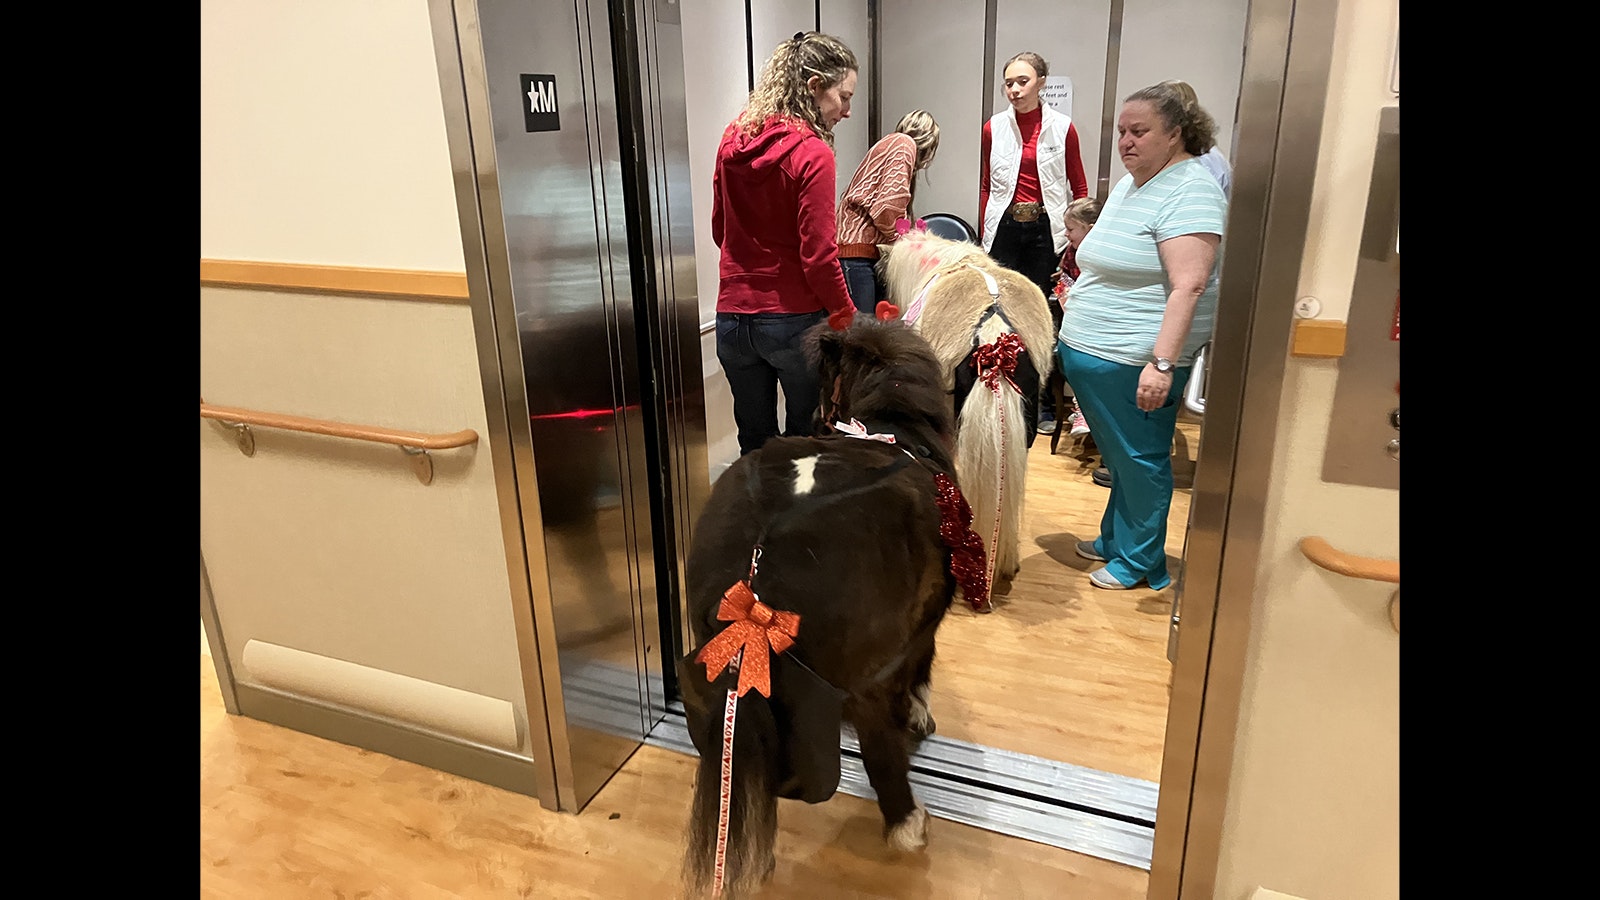 Tootsie Roll and Chip head into the elevator at the Amie Holt Care Center in Buffalo to visit the residents on the second floor.